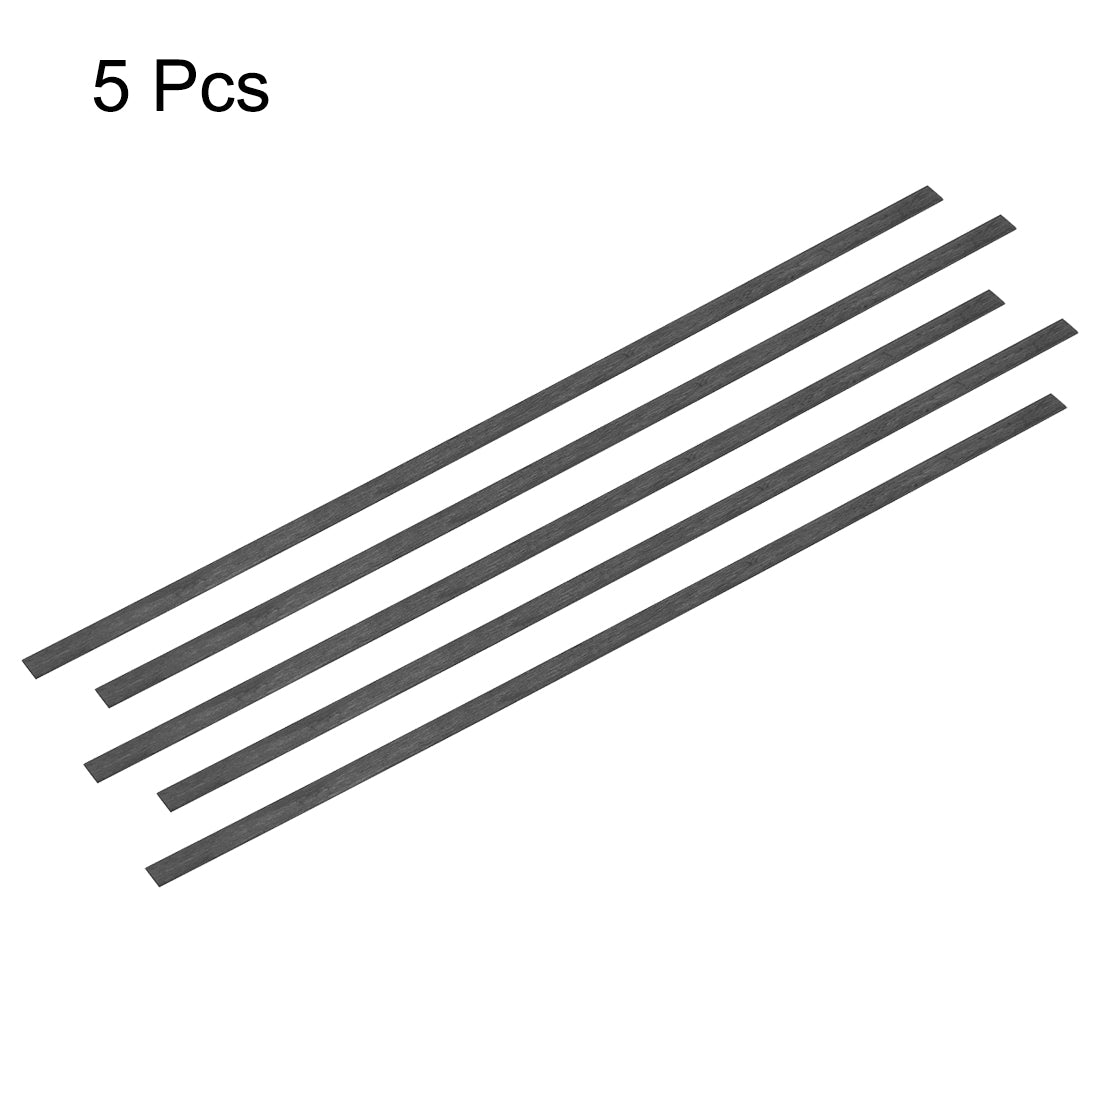 uxcell Uxcell Carbon Fiber Strip Bars 0.6x5mm 400mm Length Pultruded Carbon Fiber Strips for Kites, RC Airplane 5 Pcs